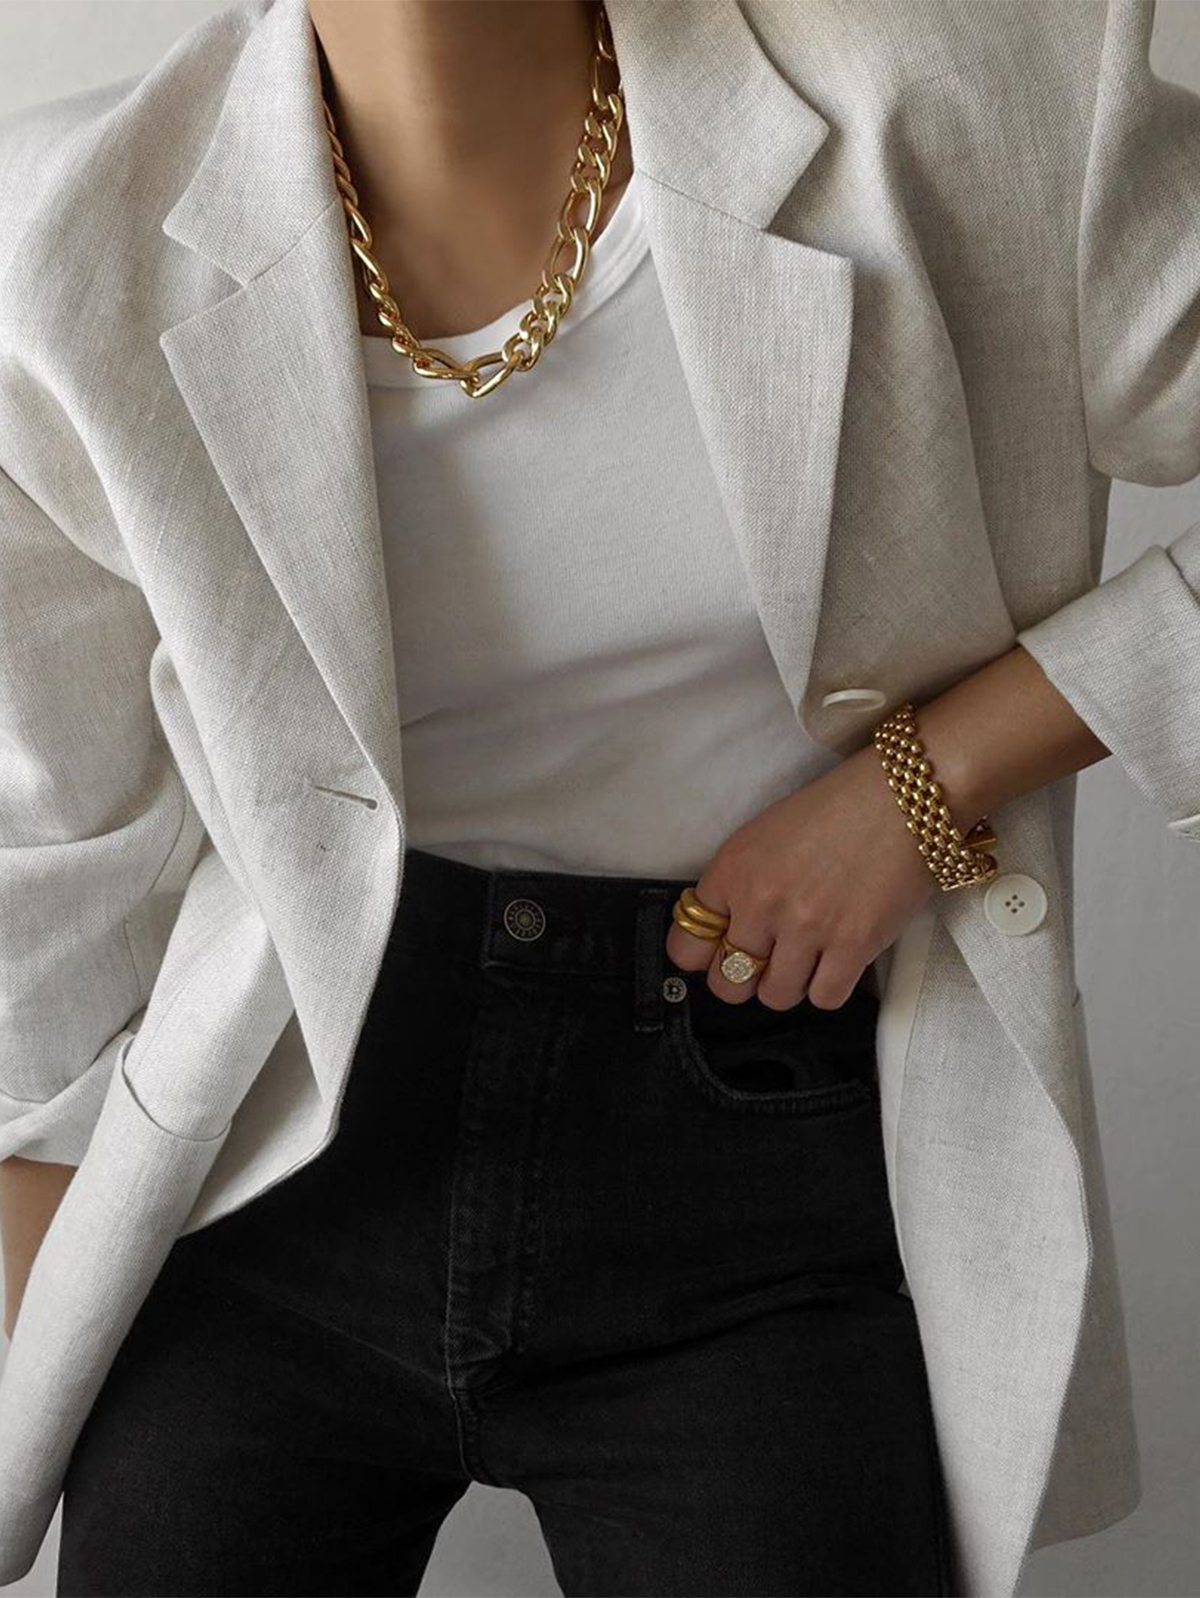 2020 Jewelry Trends — Chain Necklaces